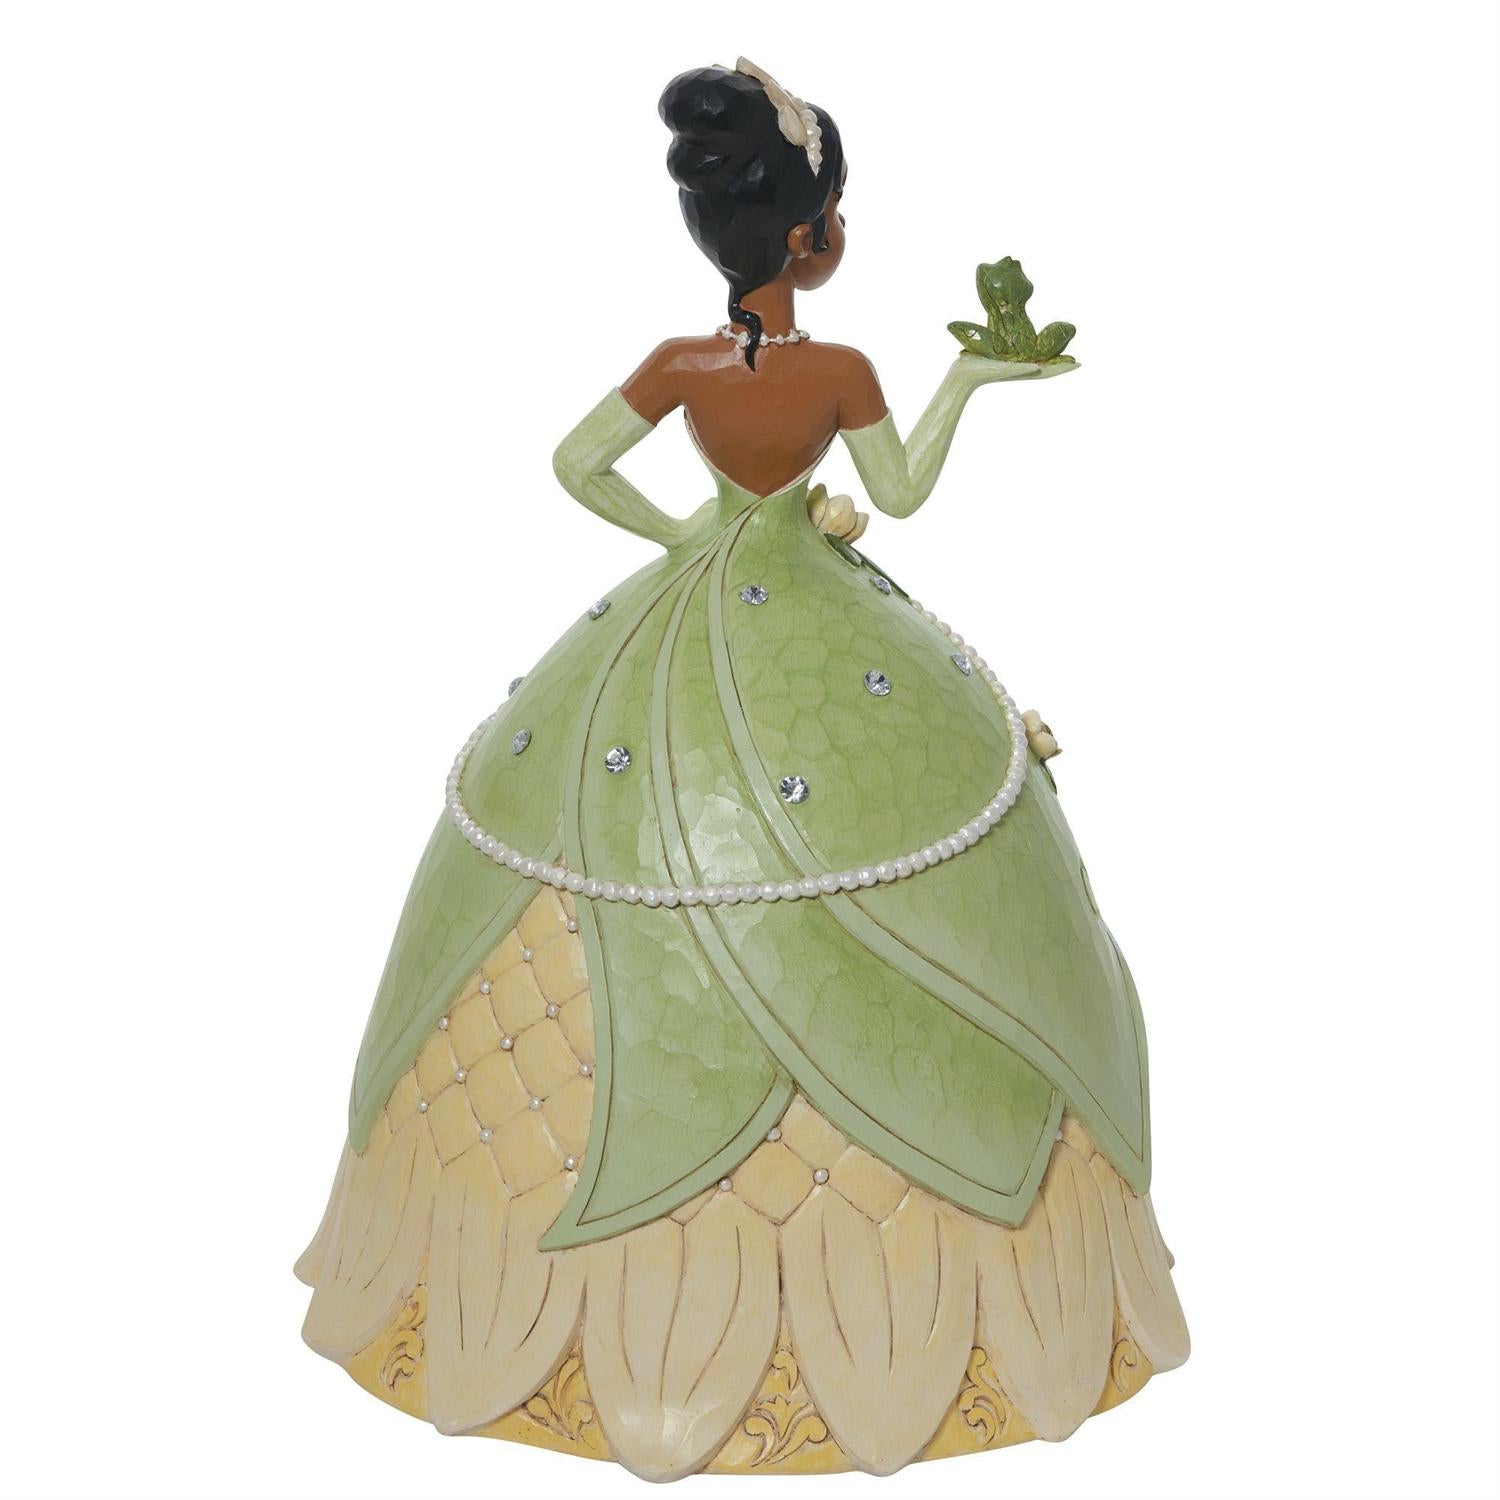 Tiana holds her soon-to-be prince, the frog, in a spectacular floral dress and tiara. Backview